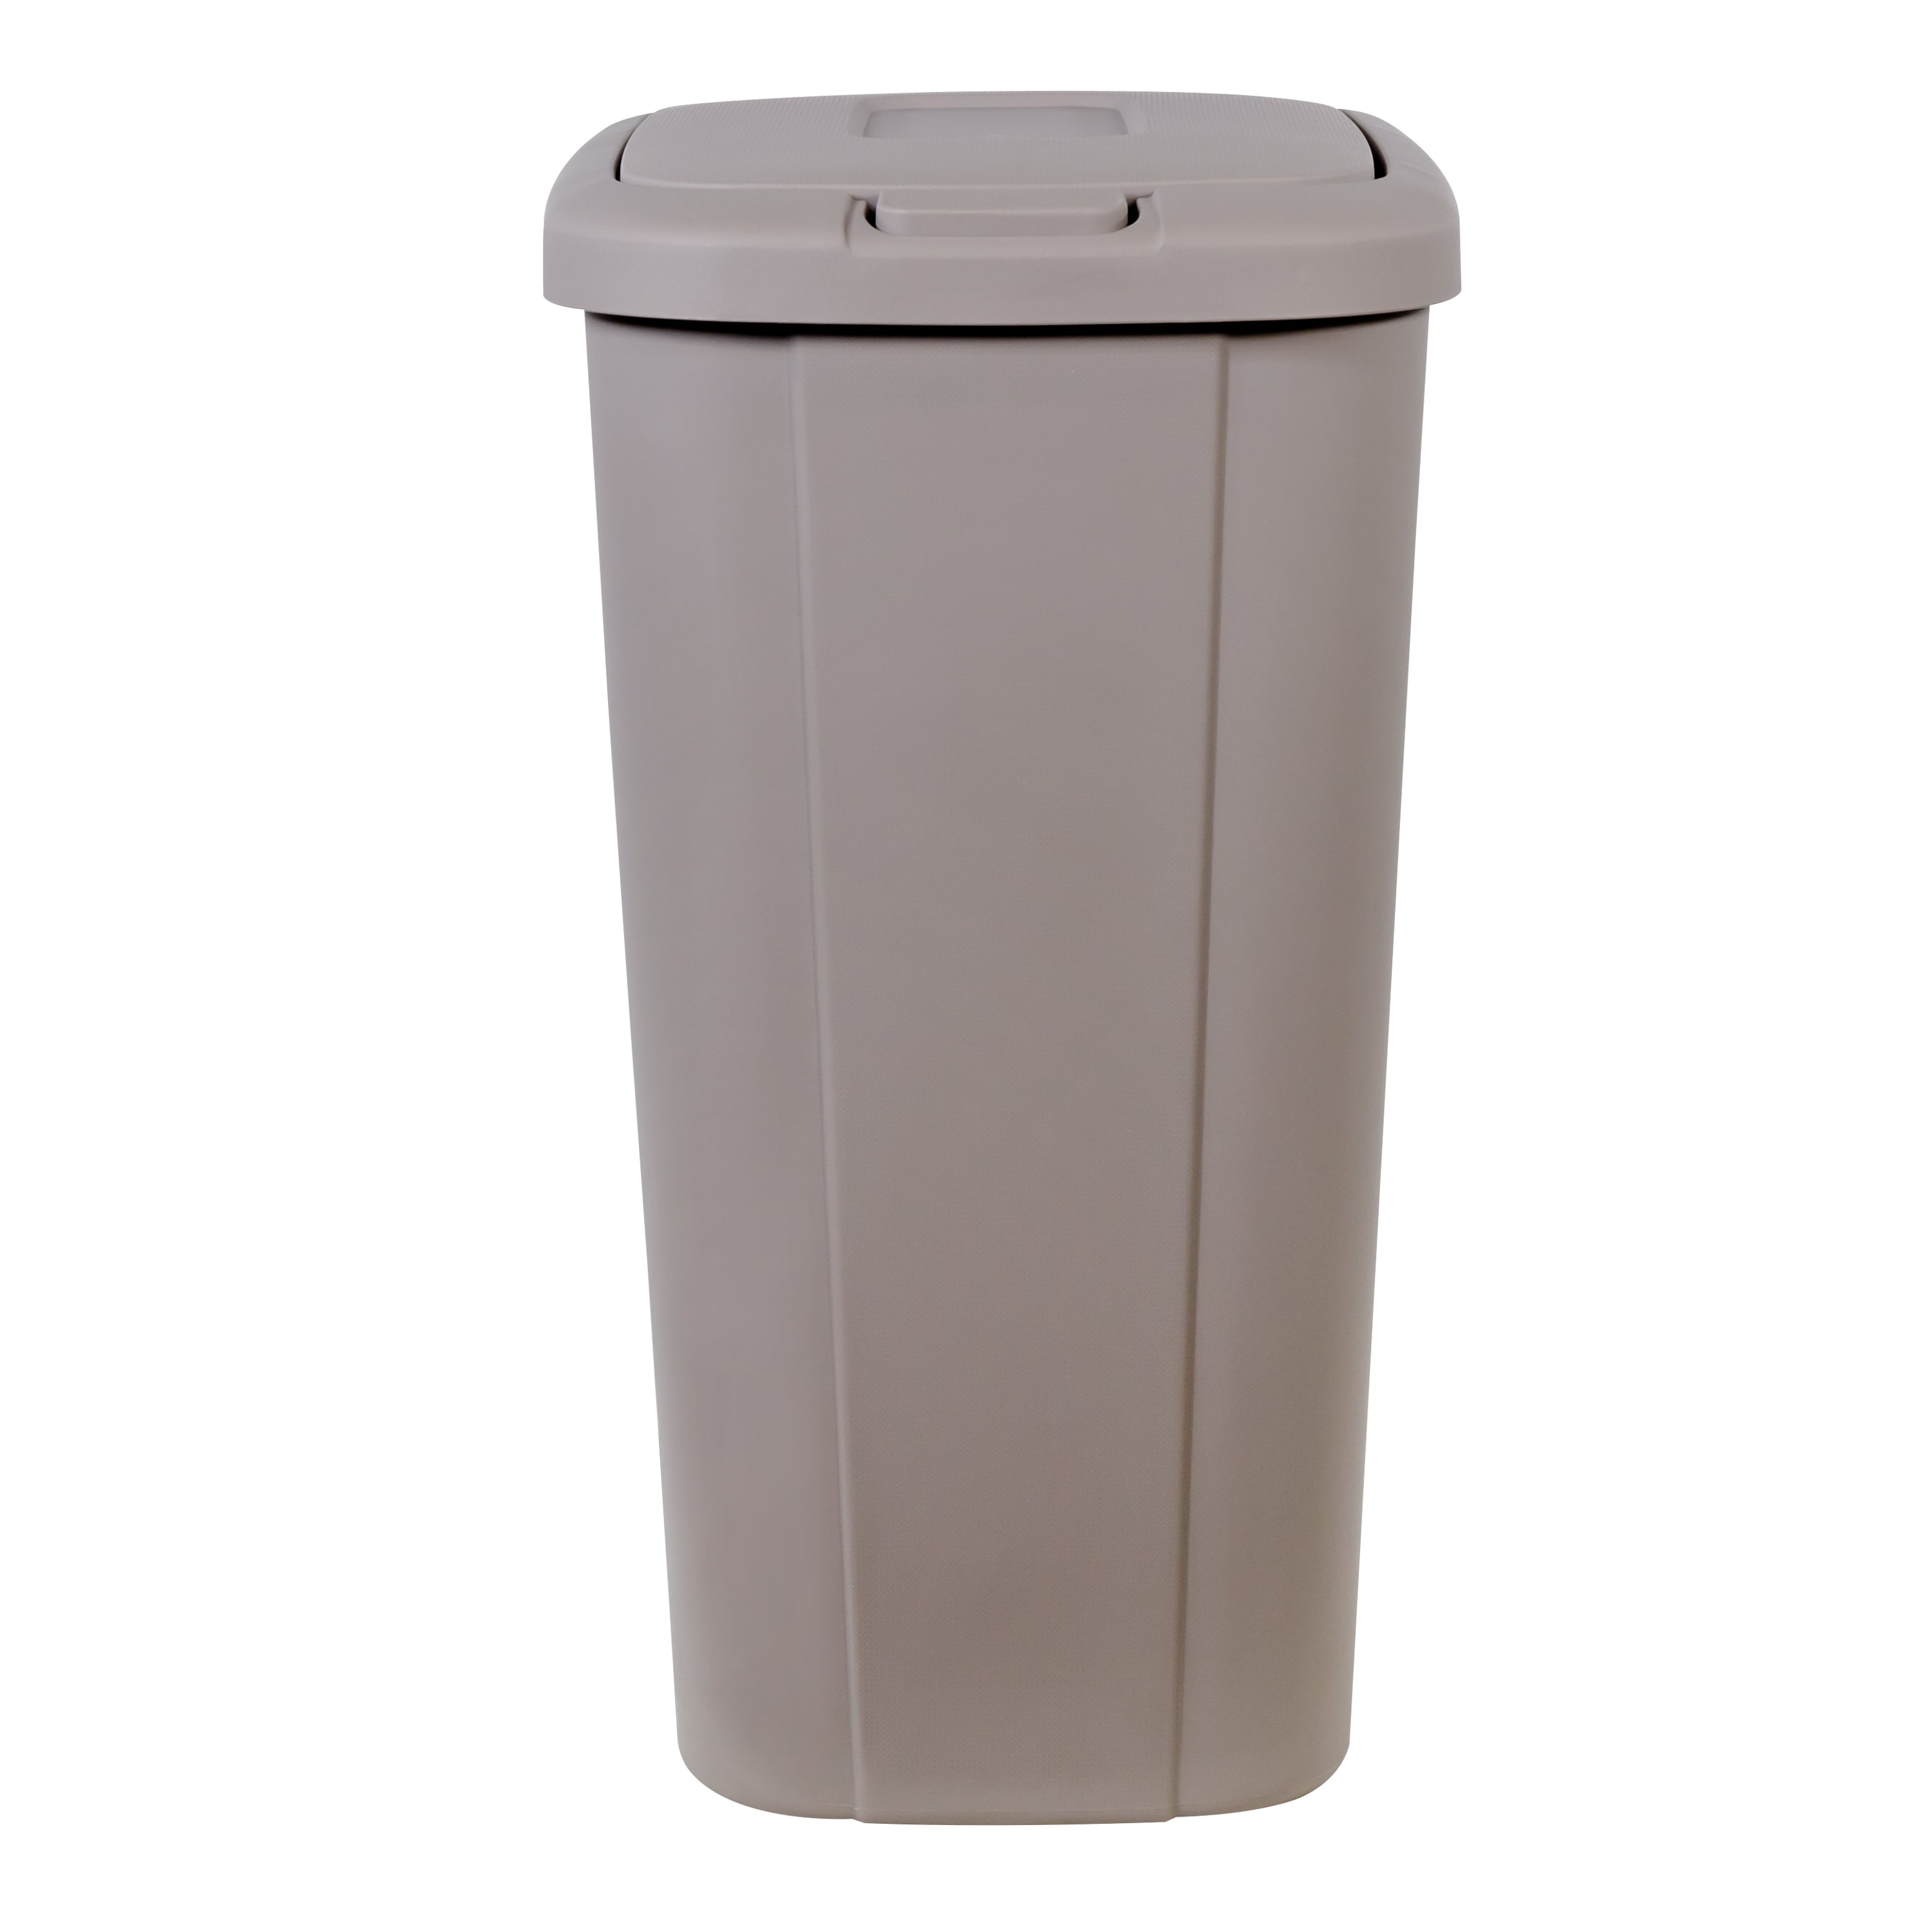 Color : Brown JN Round Trash Can Elastic Cover Press Trash Can Portable Plastic Bathroom Household With Lid Trash